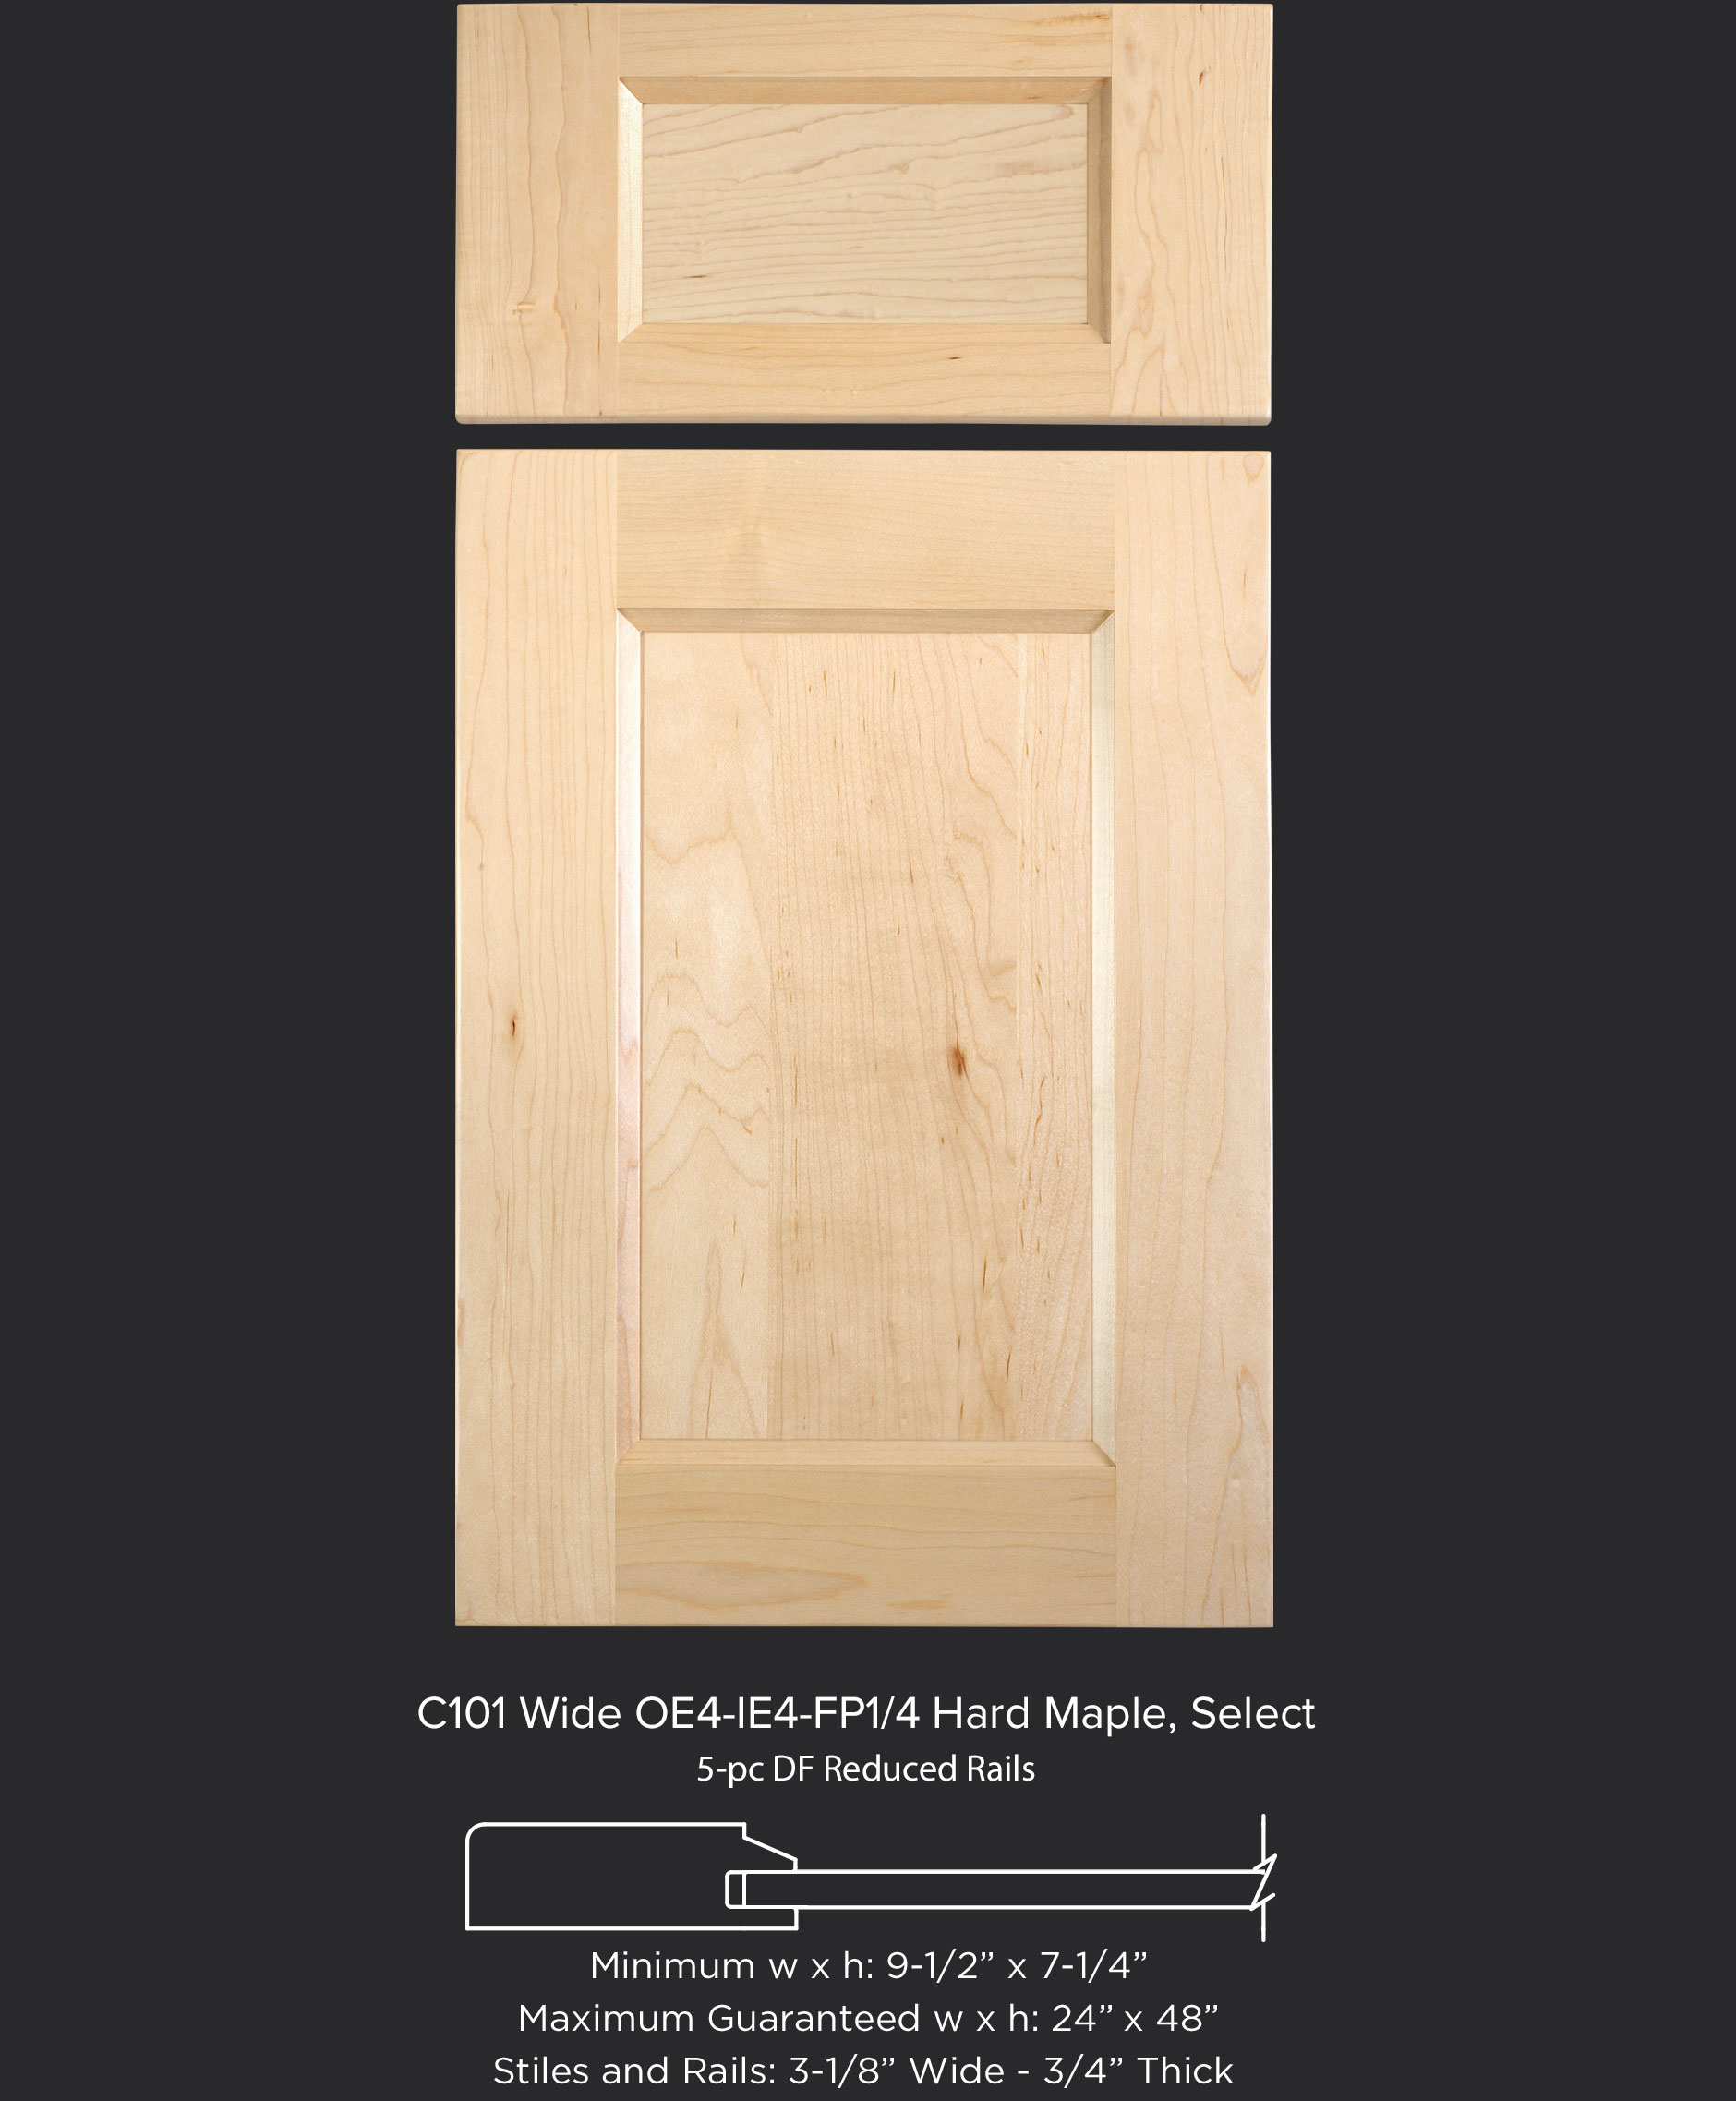 C101 Wide OE4 IE4 FP1/4 in Hard Maple Select with Reduced Rail Drawer Front